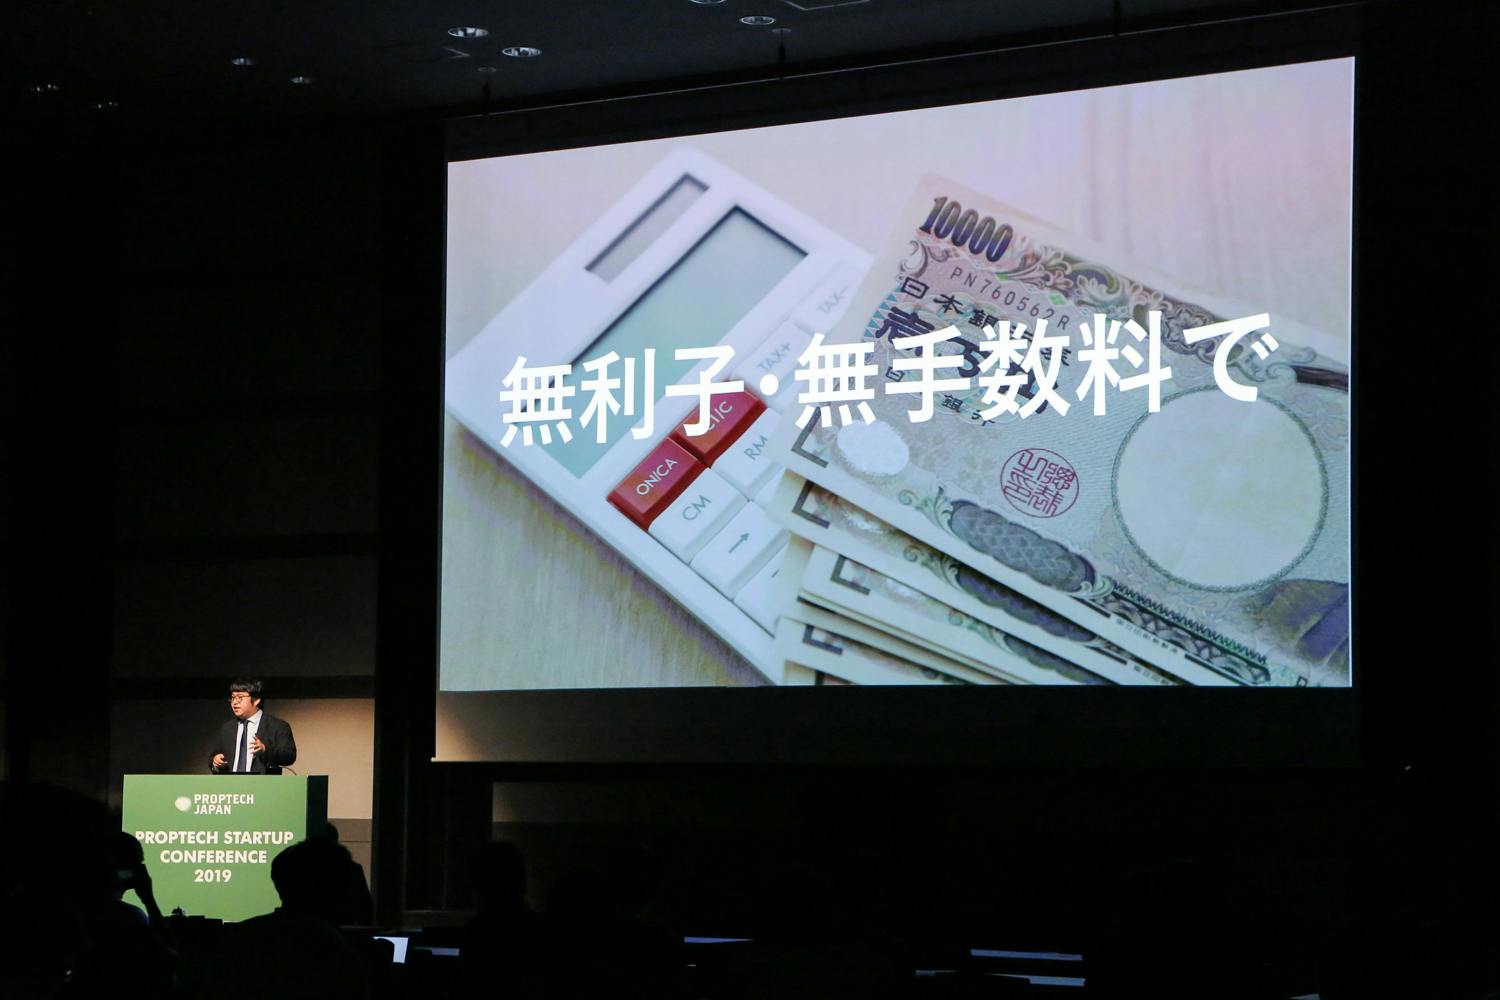 「PropTech Startup Conference 2019」に登壇しました